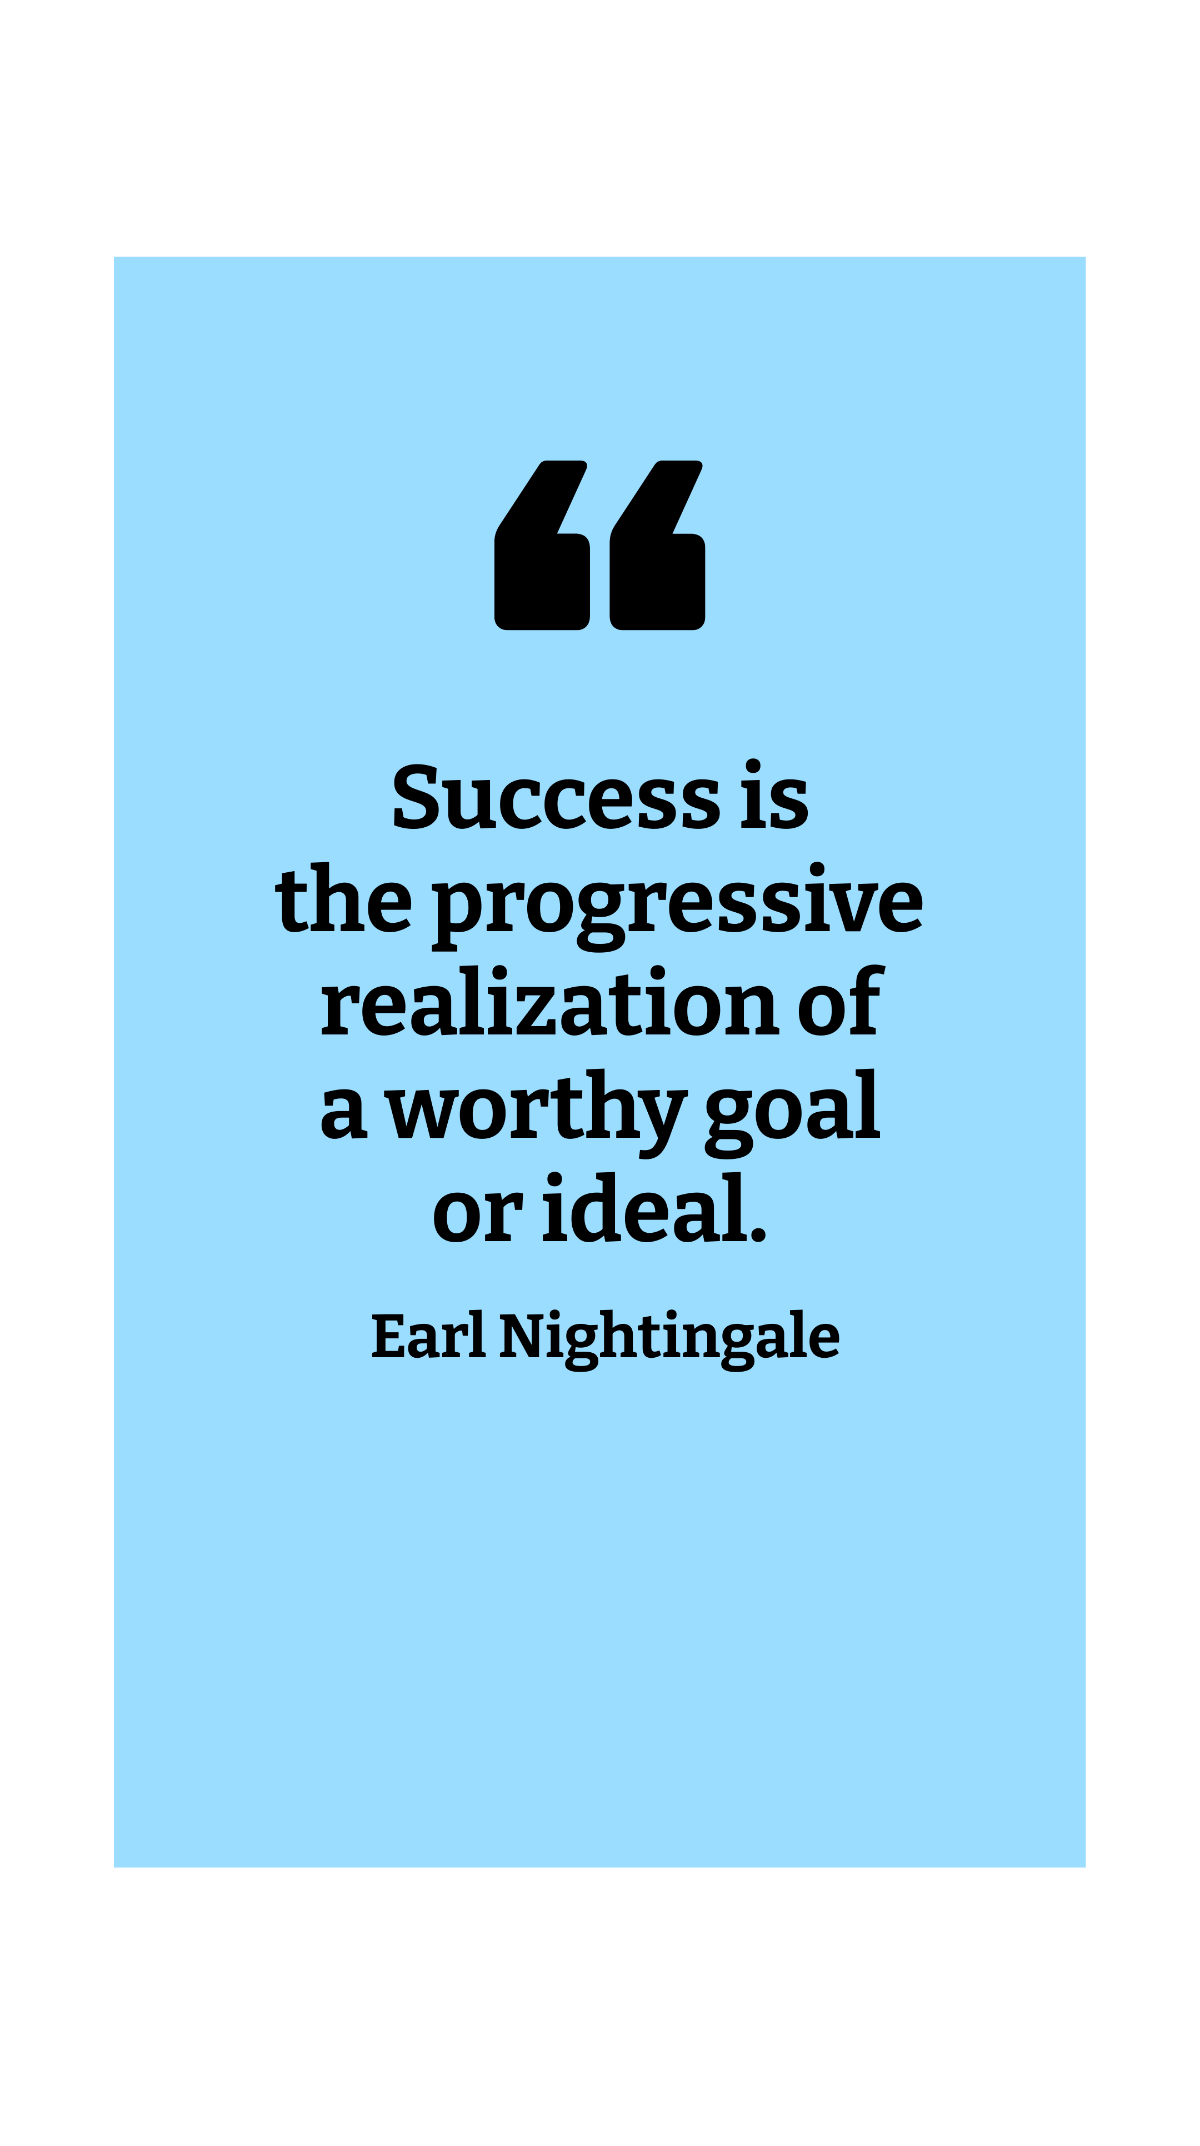 Earl Nightingale - Success is the progressive realization of a worthy goal or ideal.